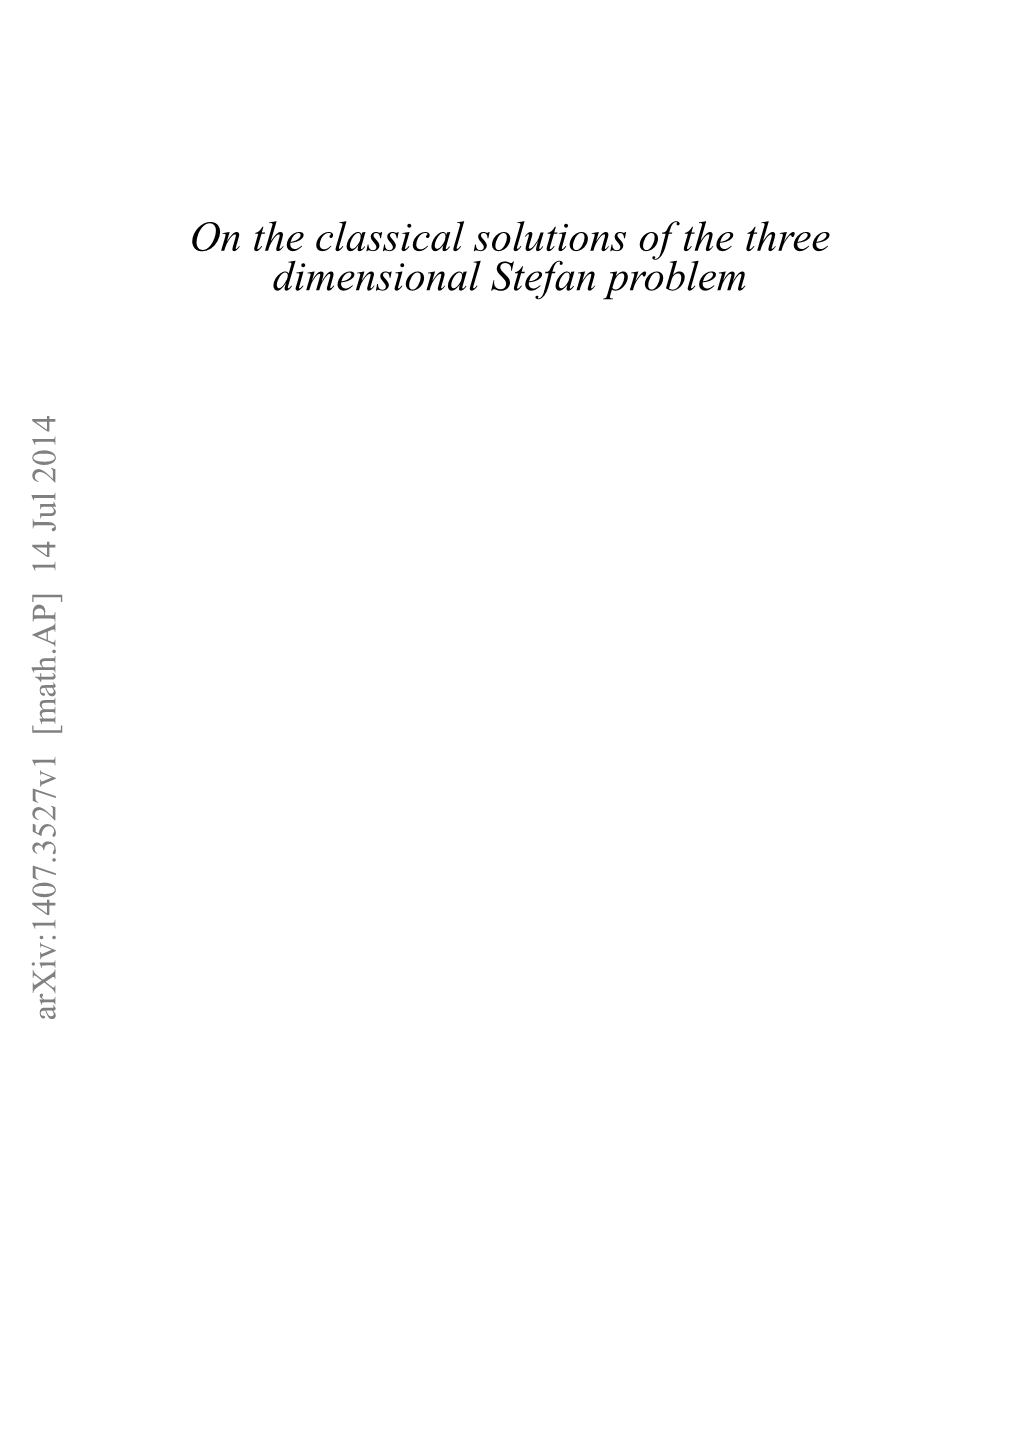 On the Classical Solutions of the Three Dimensional Stefan Problem Jun-Ichi Koga